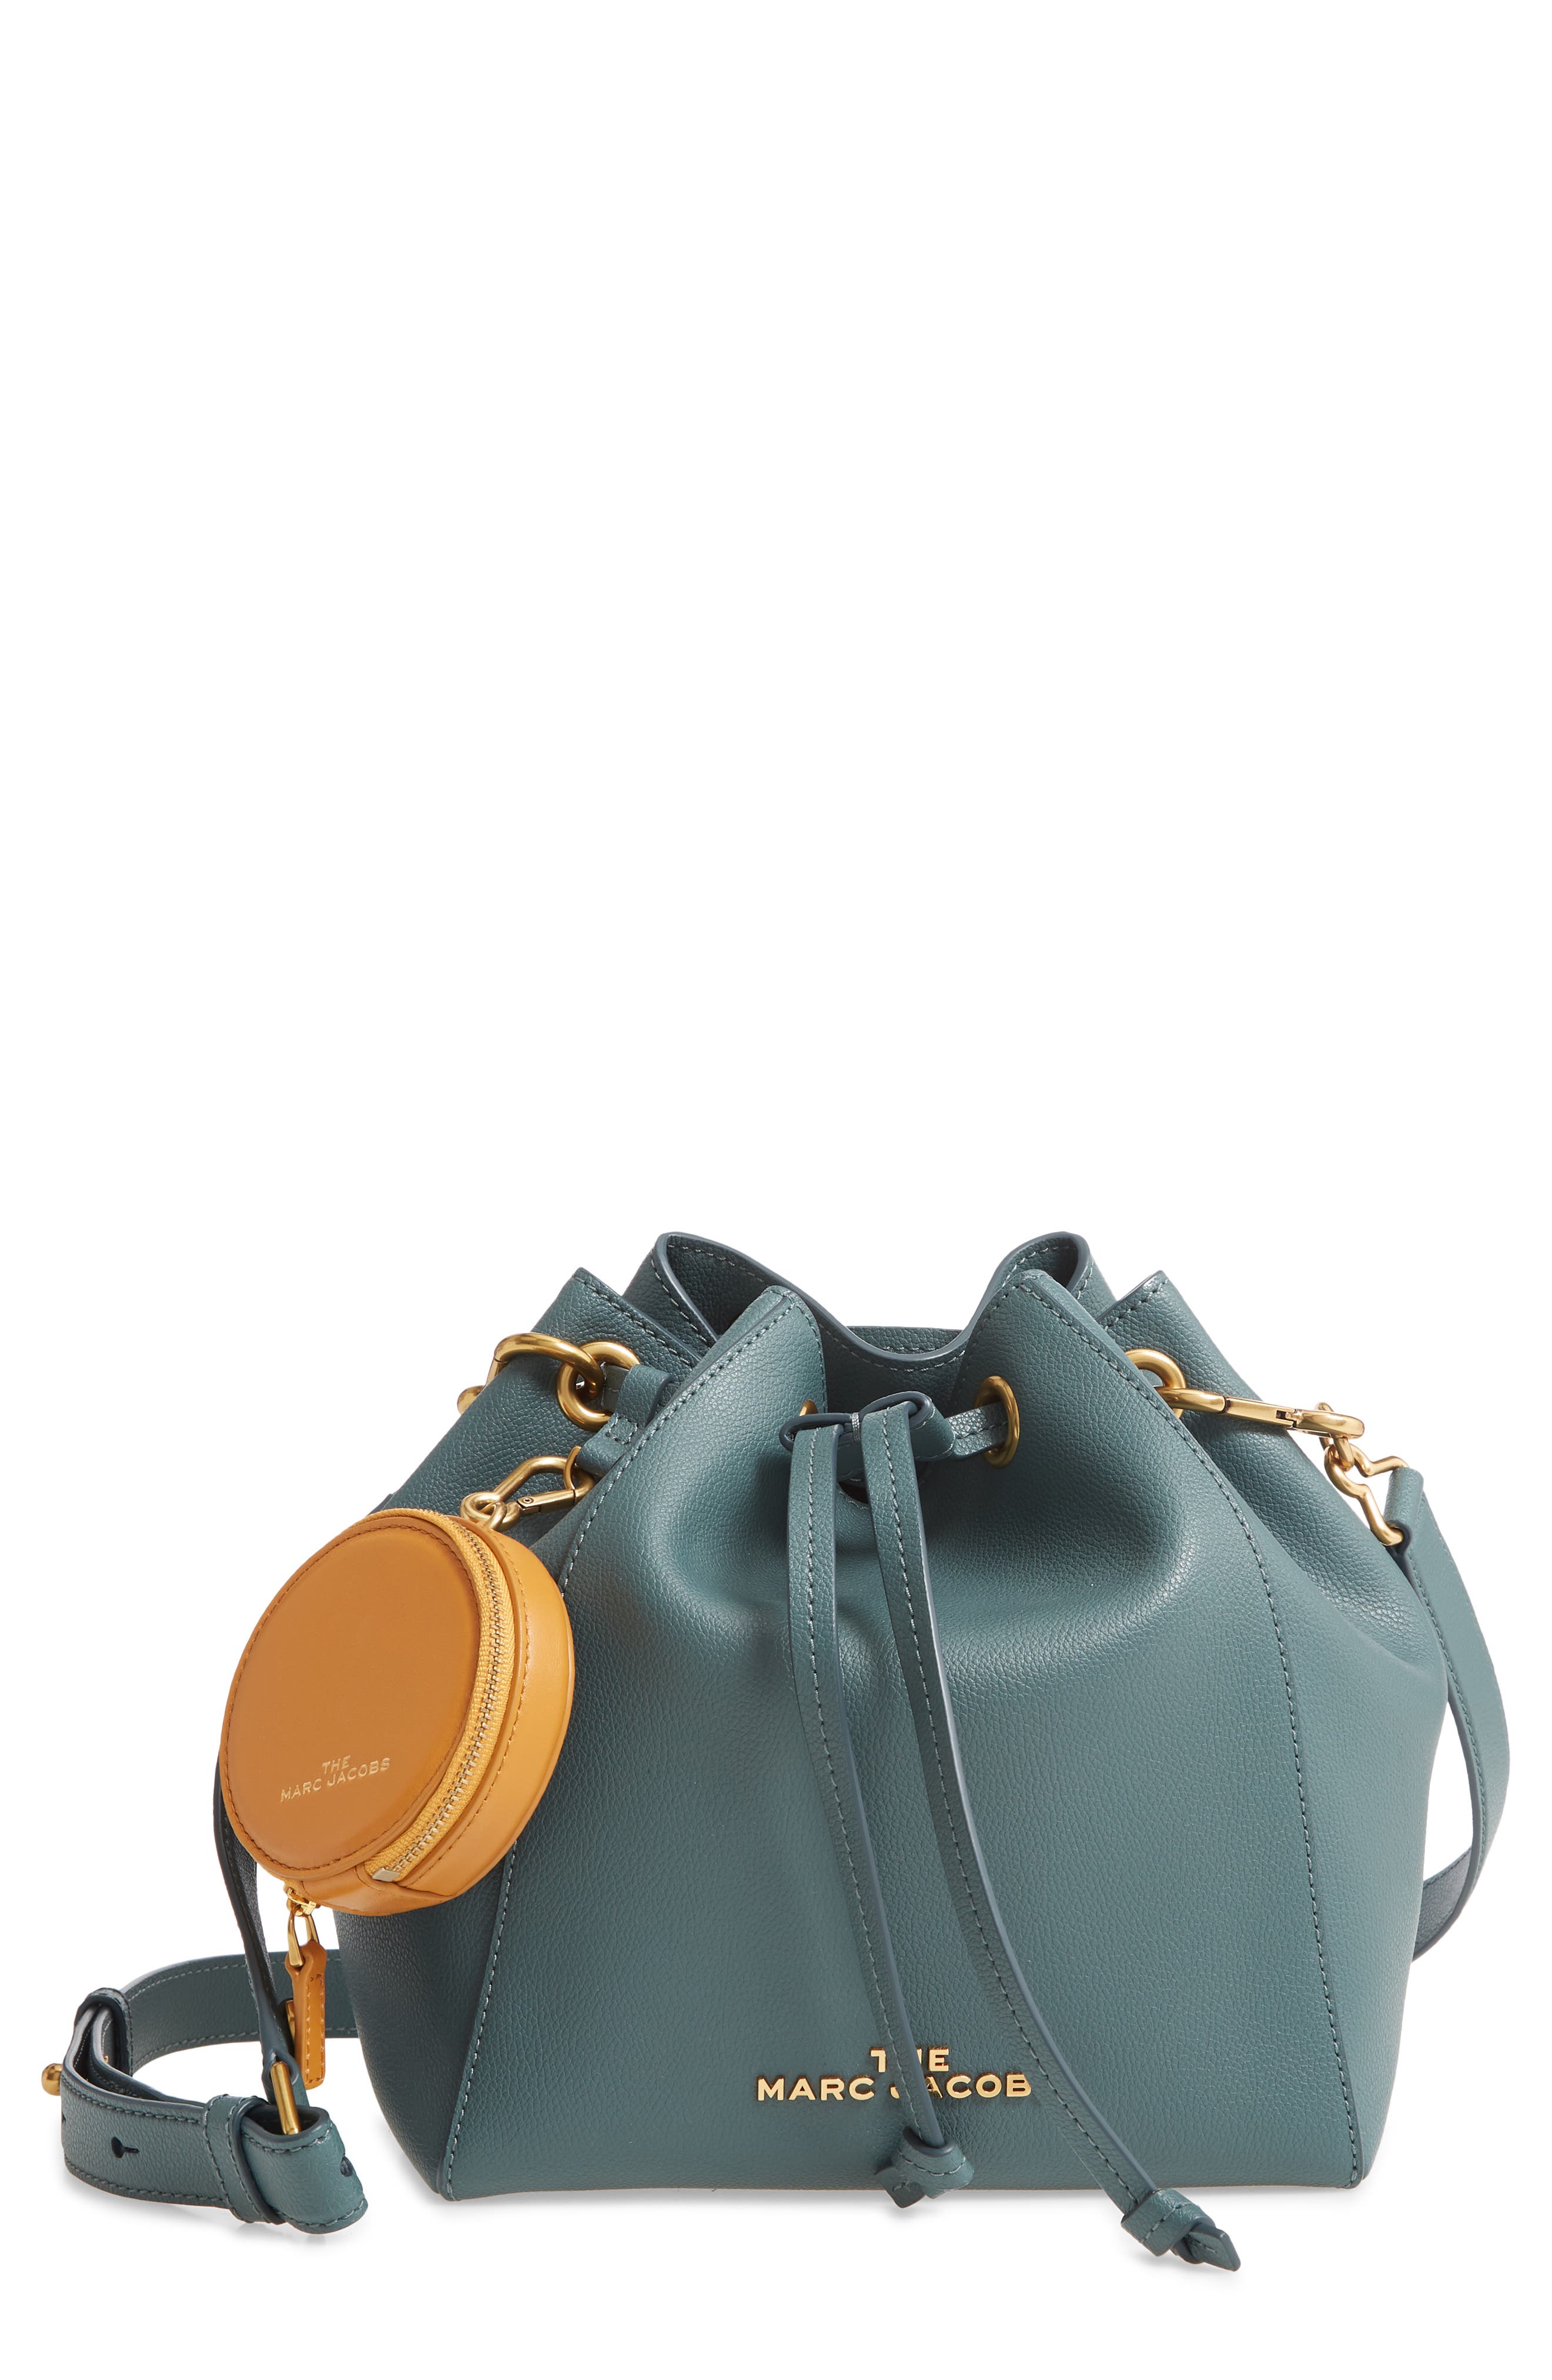 THE MARC JACOBS | The Bucket Bag Leather Crossbody Bag | Nordstrom Rack